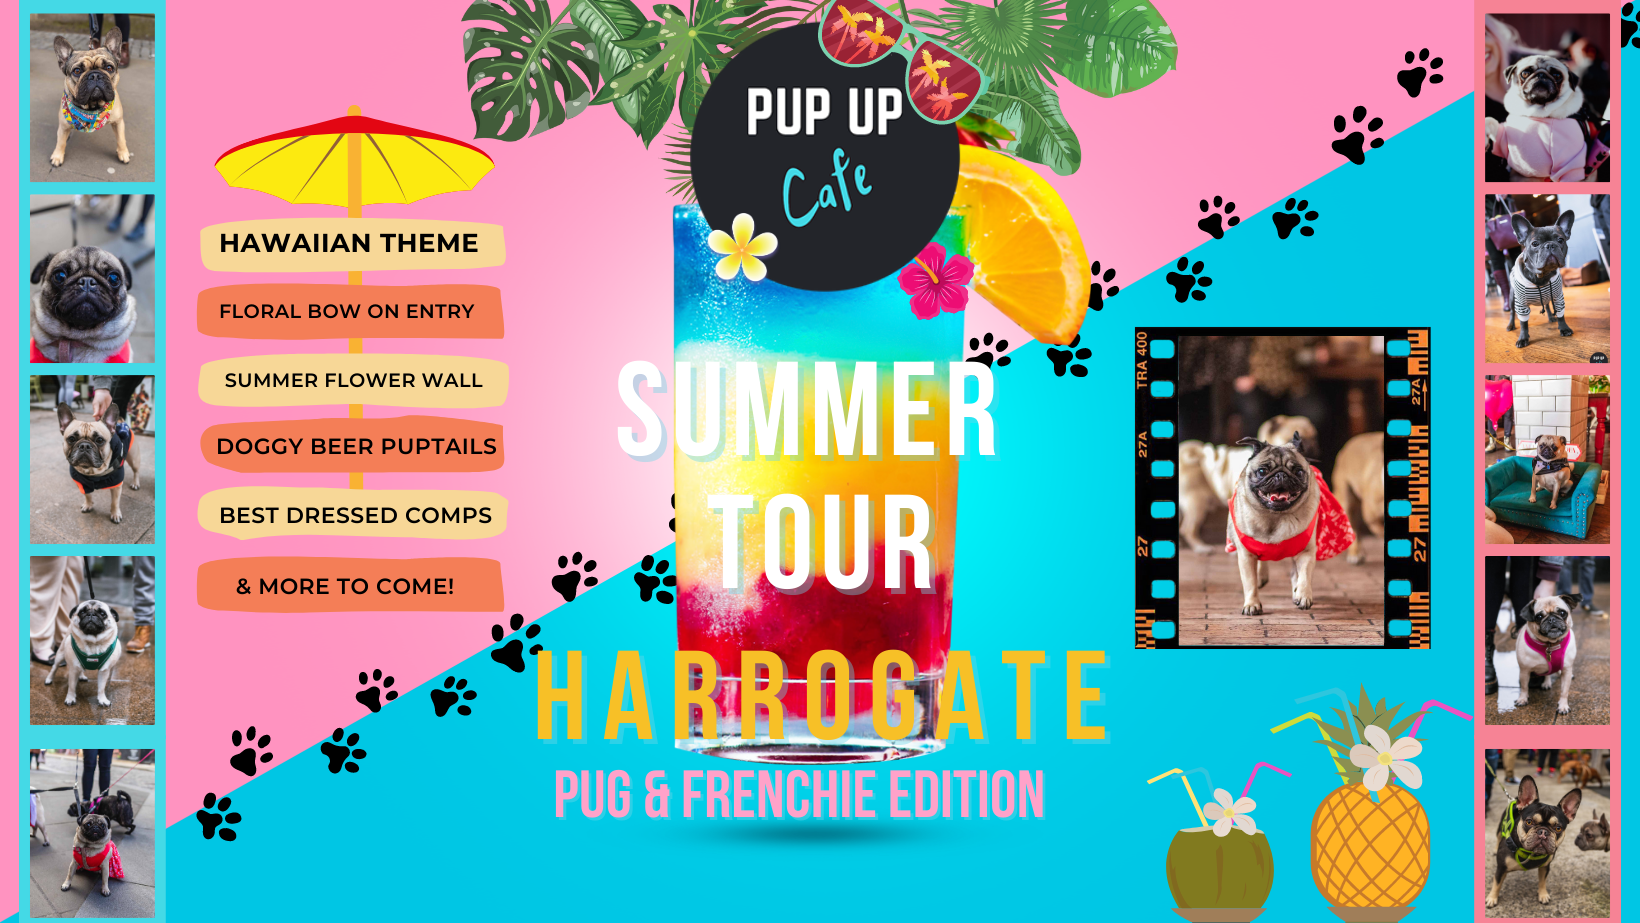 Pug/Frenchie Pup Up Cafe – Harrogate | SUMMER TOUR! 🌞